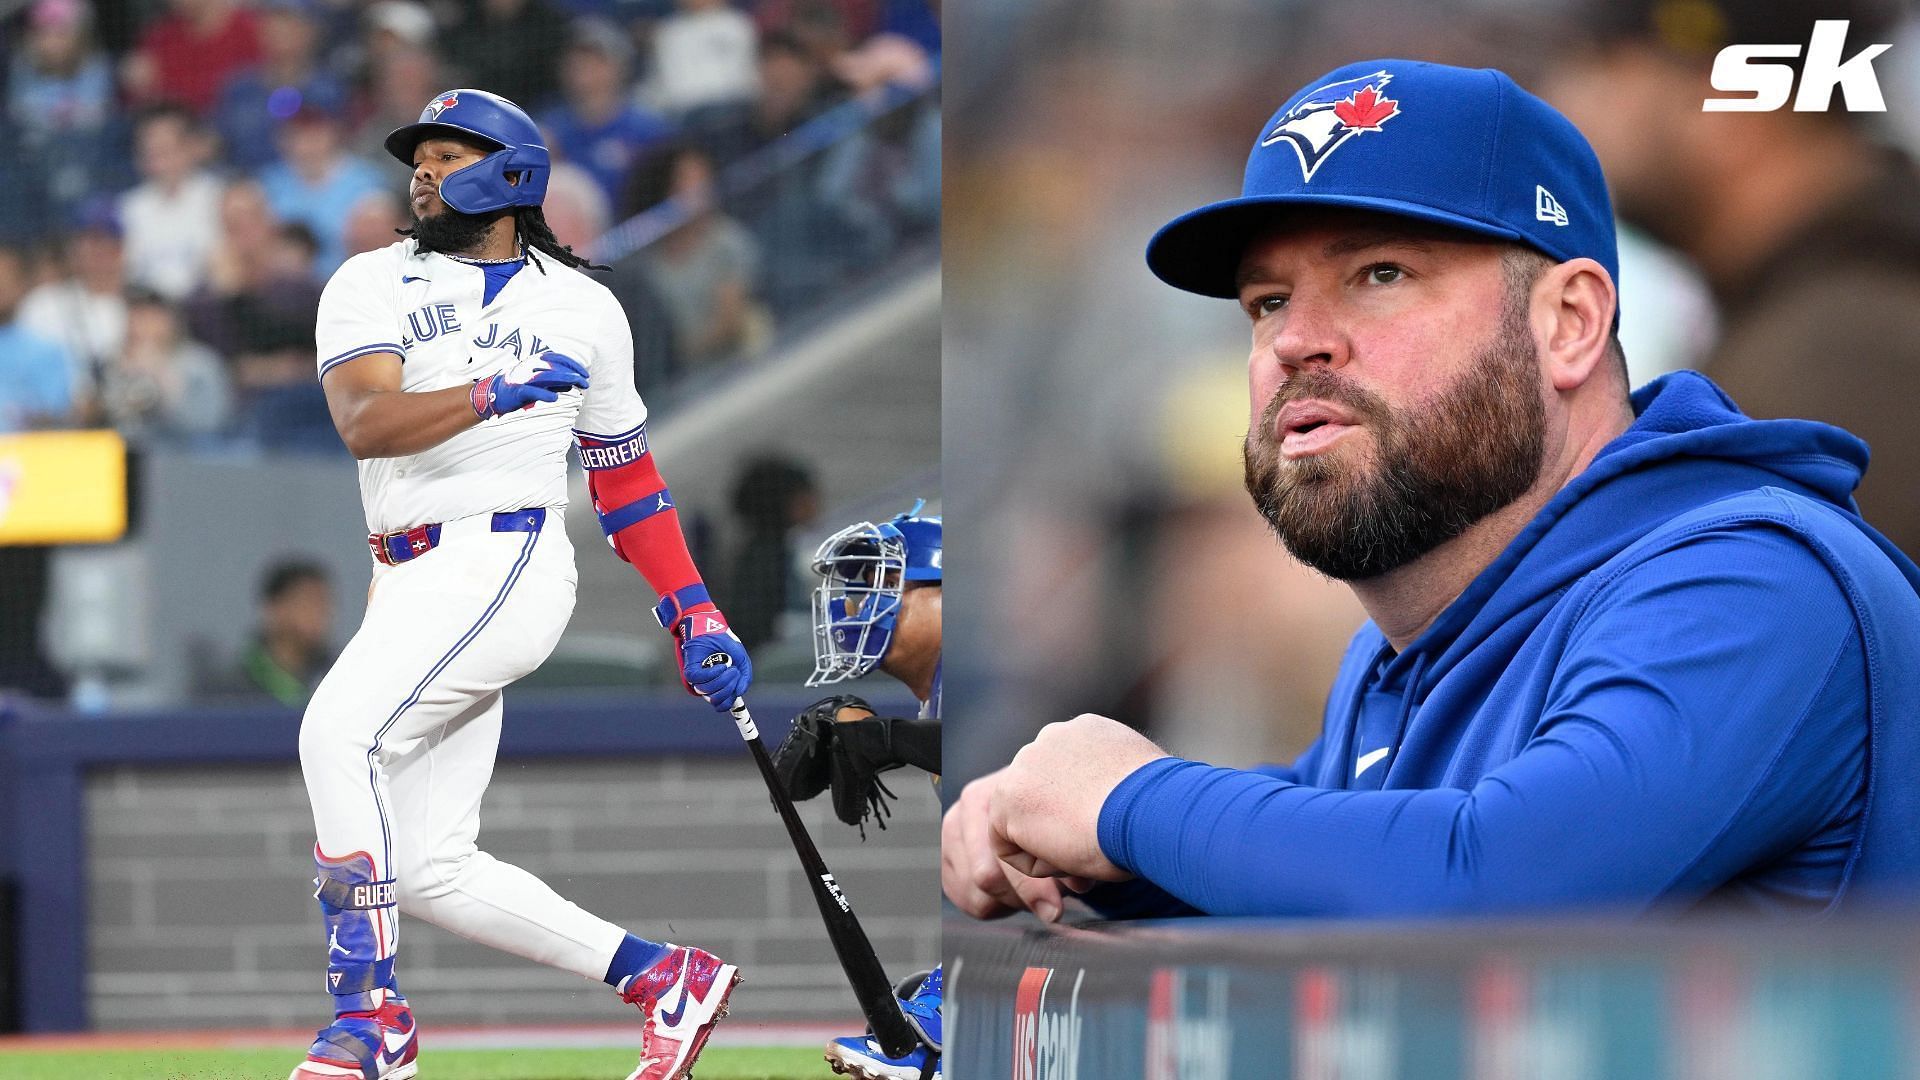 John Schneider spoke about the urgency that the Toronto Blue Jays need to start playing with